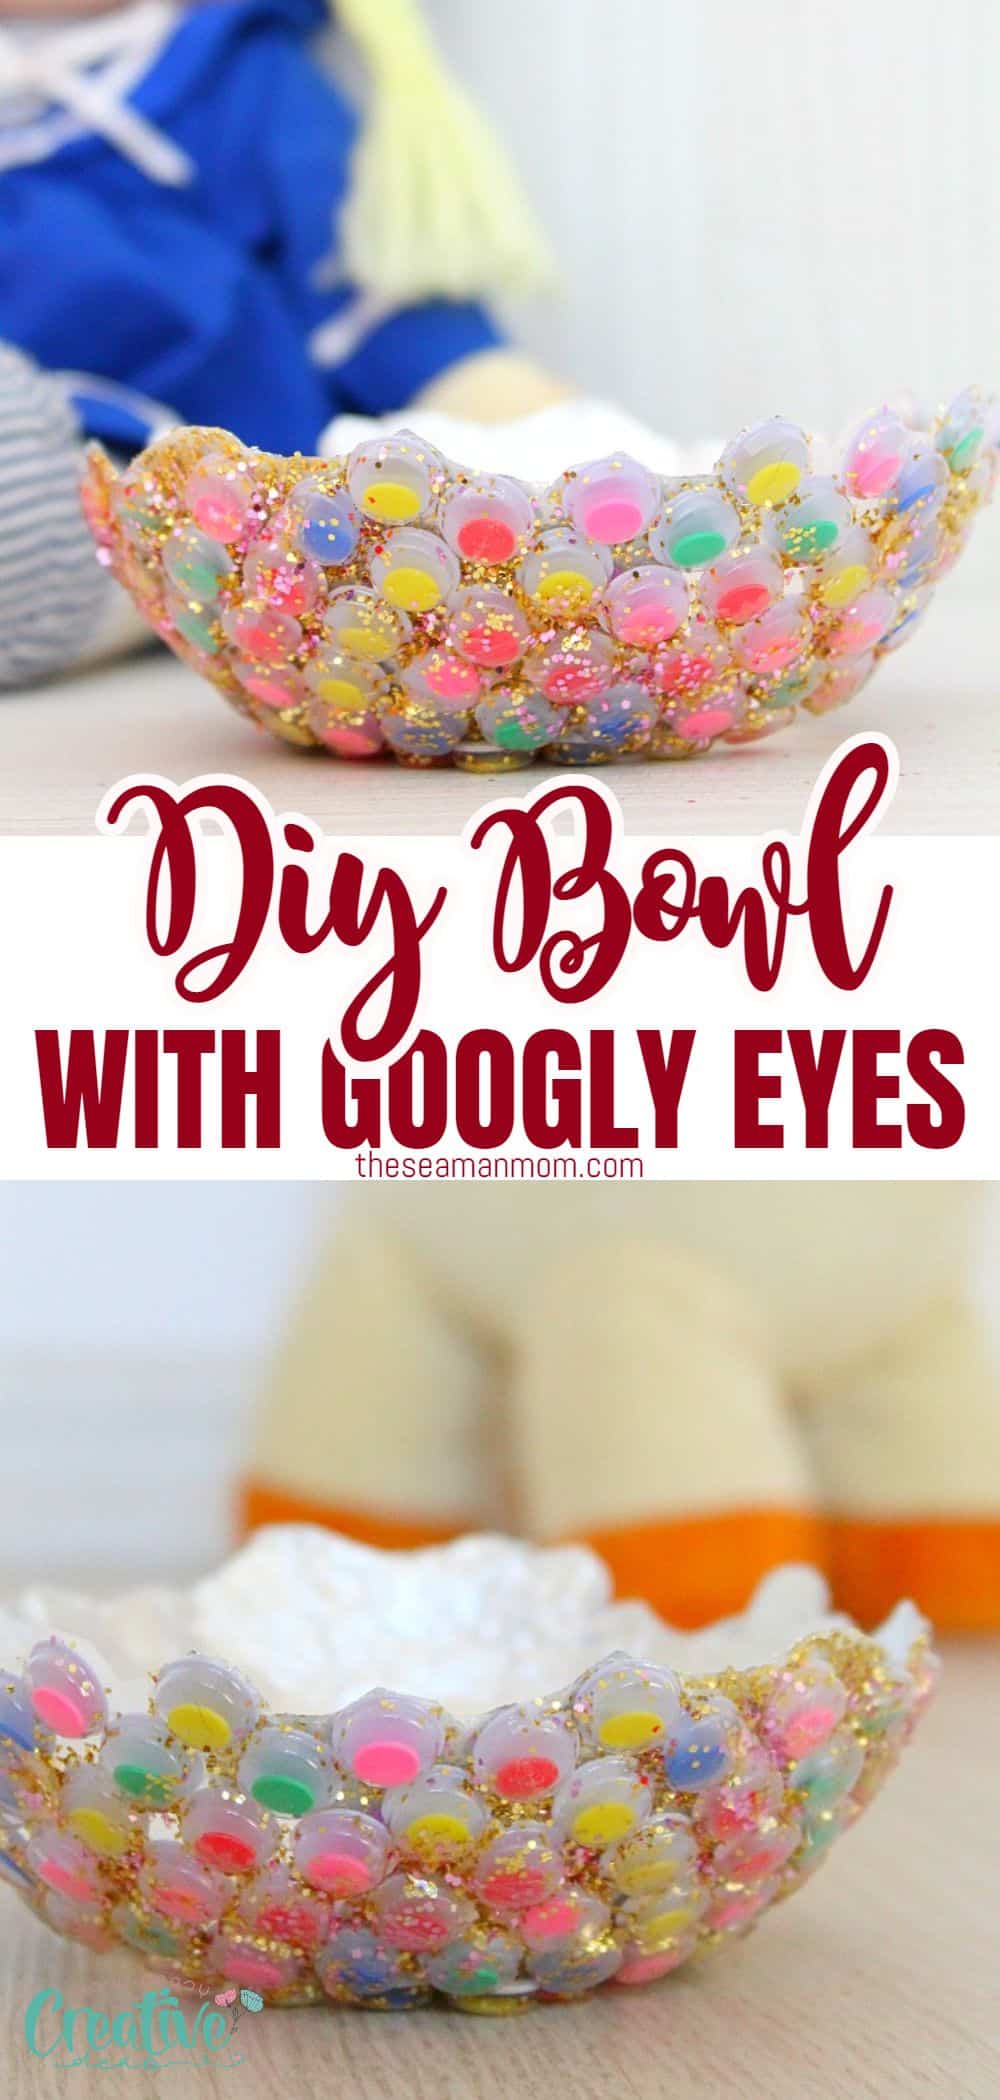 Create a special moment with your little ones while making an affordable and effortless DIY bowl. This fun project can be used as decorative room pieces or given away as gifts - the possibilities are endless! via @petroneagu